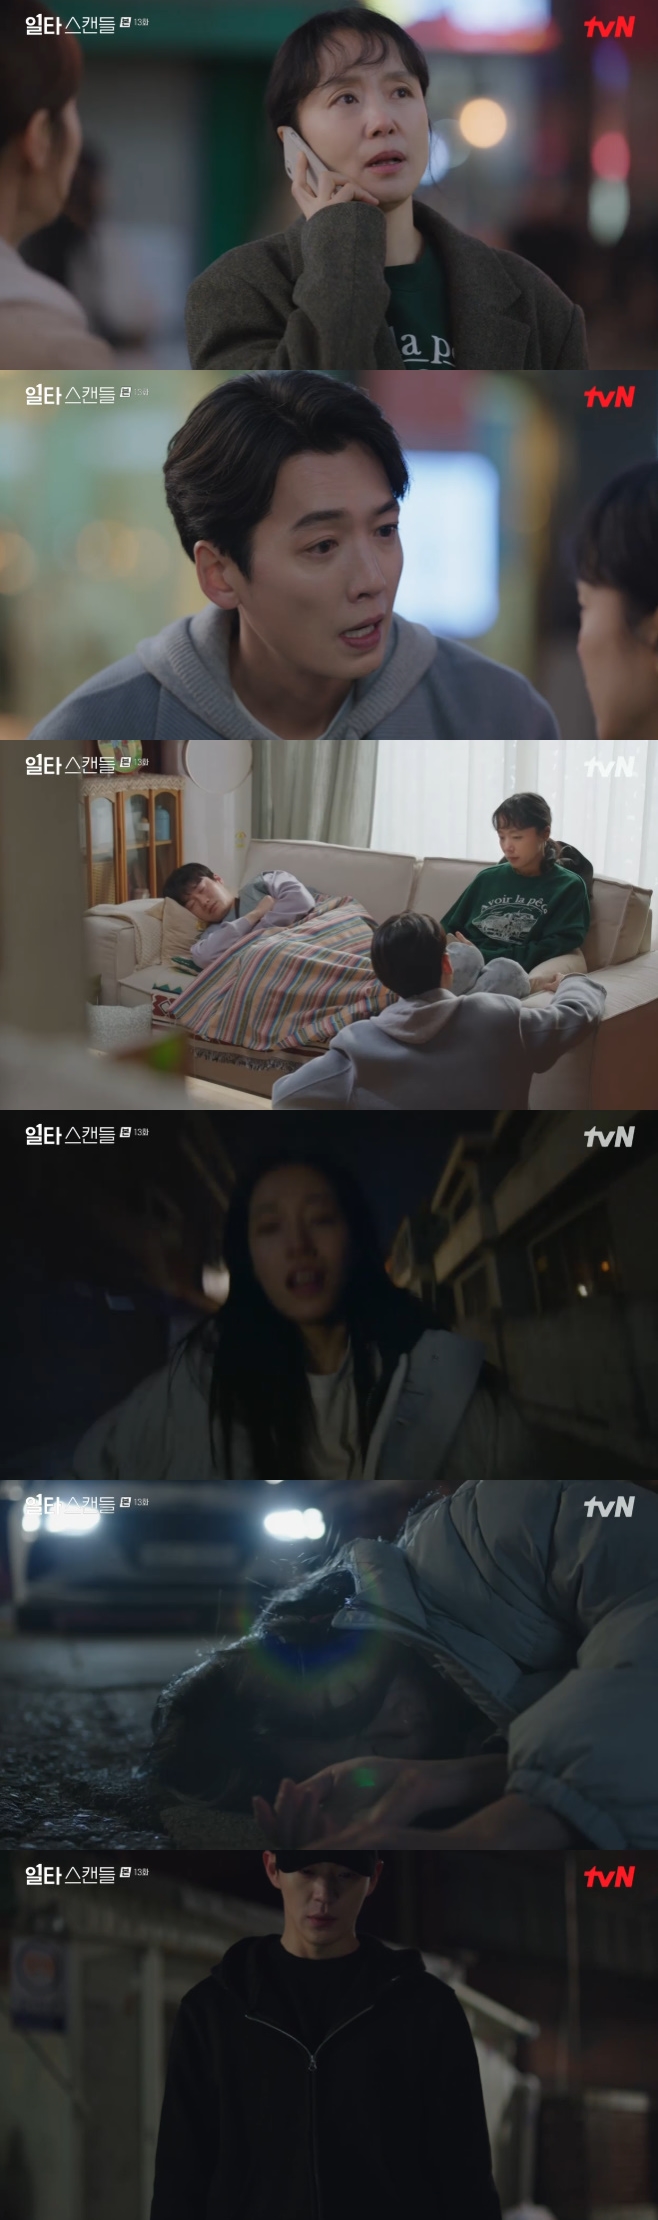 Royunseo was hit by an accident.In the 13th episode of TVN Saturday Drama (playwright Yang Hee-seung and director Yoo Je-won) broadcasted on the 25th night, the secret of Shin Jae-ha began to emerge.After the Korean test, Namhai visited Lee Seon-jae and said, Lets talk for a while, but Lee Seon-jae avoided it, and instead Bang Su-a (Kang Na-eon) grabbed him.Yesterday, Im smitten with you, Im smitten with you, Im smitten with you, Im smitten with you, Im smitten with you, Im smitten with you, Im smitten with you, Im smitten with you, Im smitten with you, Im smitten with you, Im smitten with you, Im smitten with you, Im smitten with you, Im smitten with you, Im smitten with you, Im smitten with you, Im smitten with you, he said. So the painter pulled the head of the South Seas and struggled, but it did not lead to a big quarrel of friends.The reason for this is that it is not so much that it is not so much that it is not so much that it is that it is not so much that it is that it is that it is that it is that it is that it is that it is that it is that it is that it is that it is that it is that it is that it is that it is Thats right, so I told you to study properly. I warned you not to miss your first grade, but you did not concentrate. I do not know what to do if you are in that shape. You should not miss it at any time this time. Lee Seon-jae, who collapsed, ignored Namhaes phone call and took his head to the desk. It was only Lee Hee-jae (Kim Tae-jung) for him. Lee Hee-jae for his sister, Lee Seon-jae burst into tears.There were others who collapsed after the test, including Bang Su-ah, who began to see things in vain due to stress from the back water and even hallucinated by pushing the South Seas off railings or through running cars.The truth is that the truth is that the truth is that the truth is that the truth is that the truth is that the truth is that the truth is that the truth is that the truth is that the truth is that the truth is that the truth is that the truth is that the truth is that the truth is that the truth is that the truth is that the truth is that the truth is that the truth is that the truth is that the truth is that the truth is that the truth is that the truth is that the truth is that the truth is that the truth is that the truth is There was no return.The only response from the police was that the last person the South Seas spoke to was Seo-jin.After the video was released, the cause of the disappearance of the South Sea was revealed. The South Sea avoided Shin Jae-ha, who was chasing himself. In the trailer that followed, the appearance of the South Korean line to the emergency room was drawn and raised concerns.